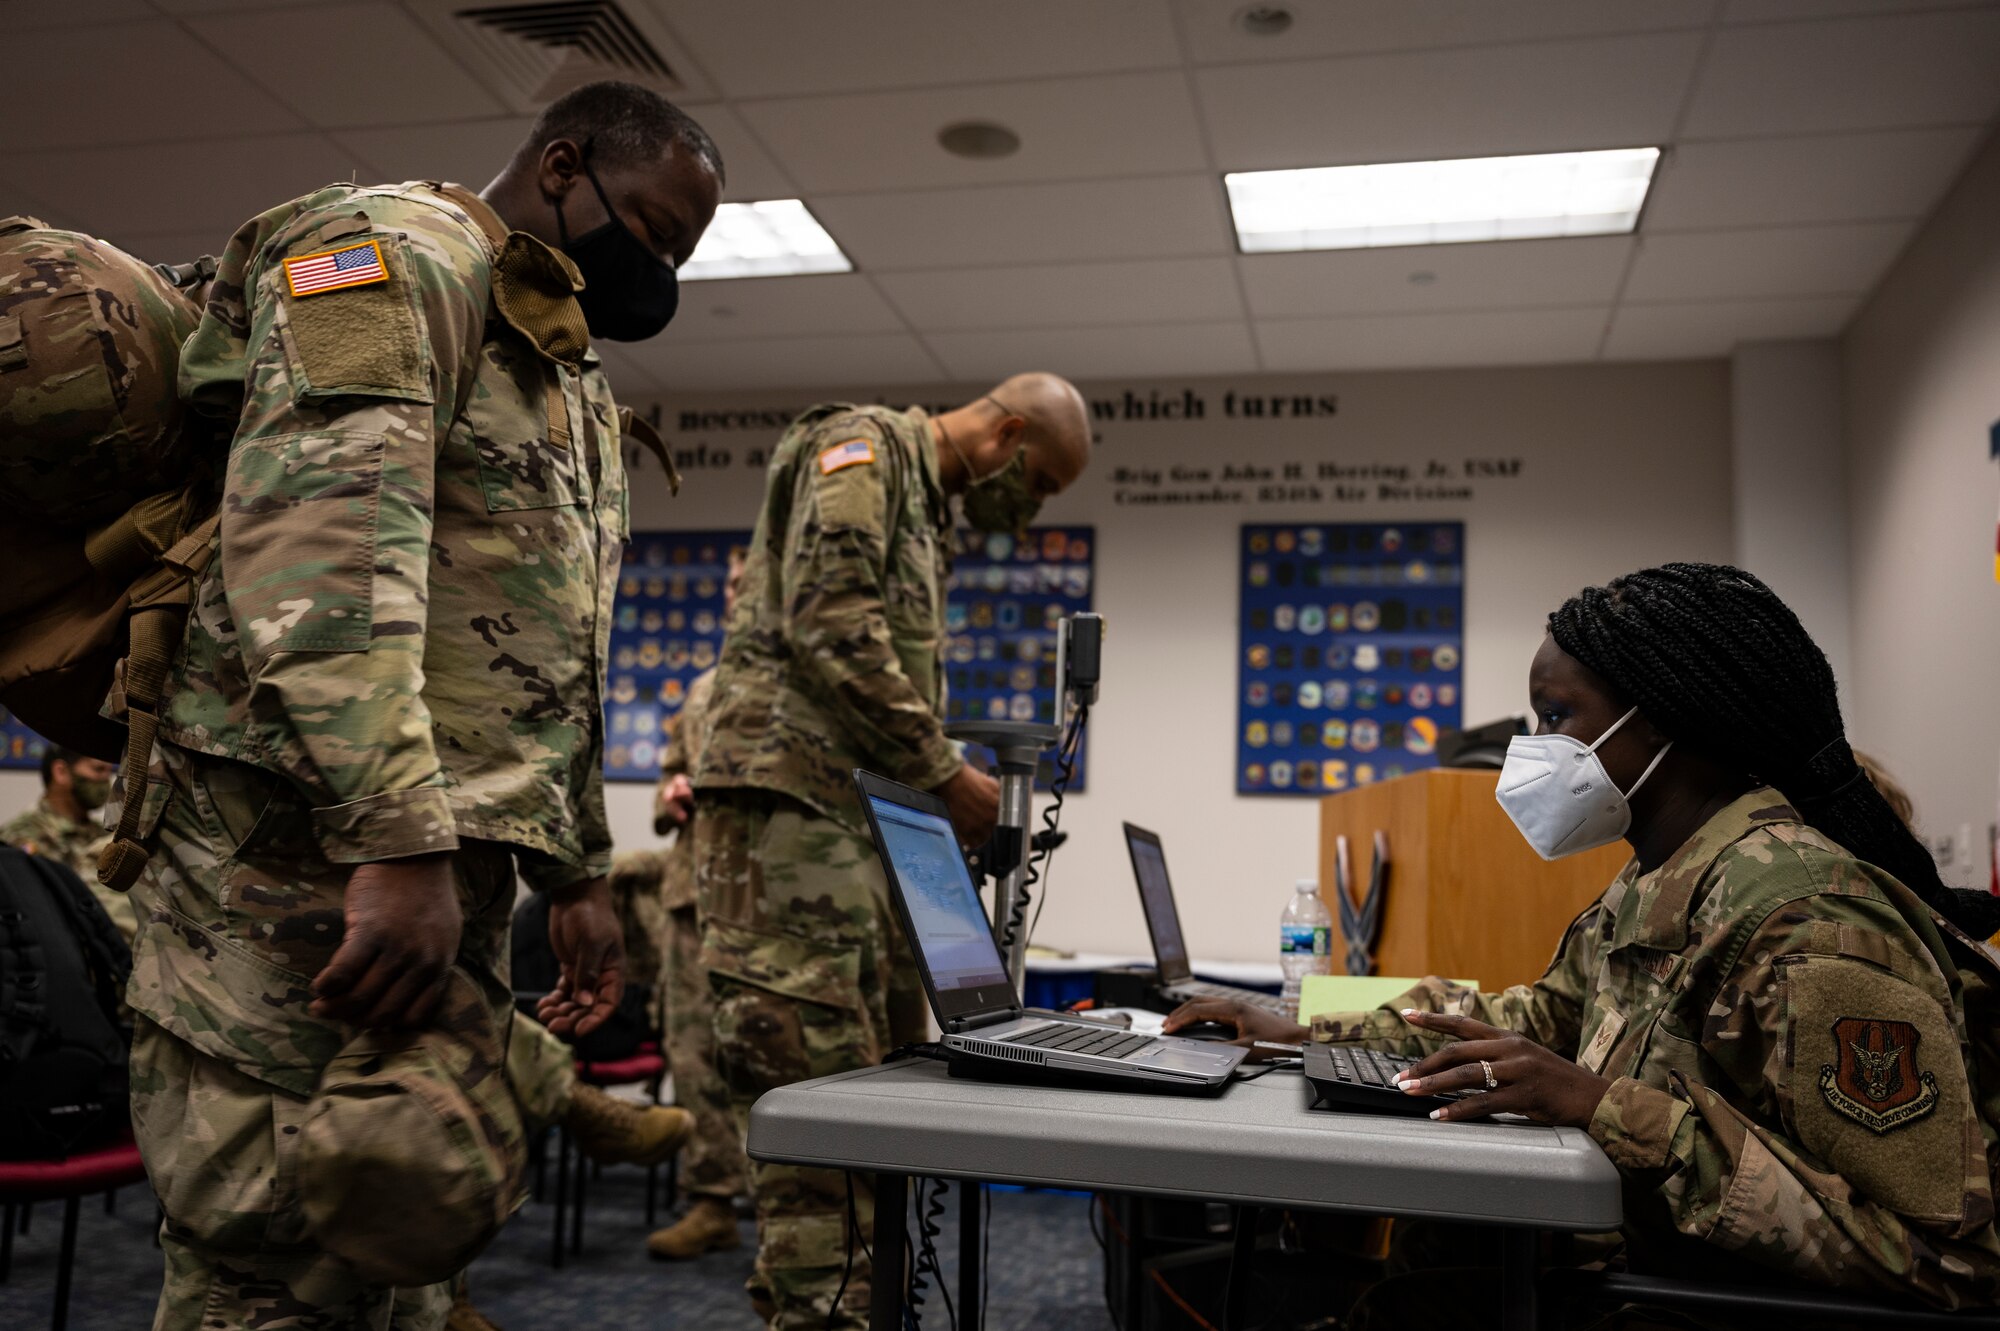 Senior Airman Gnecco Chuol, 32nd Aerial Port Squadron passenger service operations technician, adds a U.S. Army Soldier to a flight manifest at the Pittsburgh International Airport Air Reserve Station, Pennsylvania, May 28, 2021.